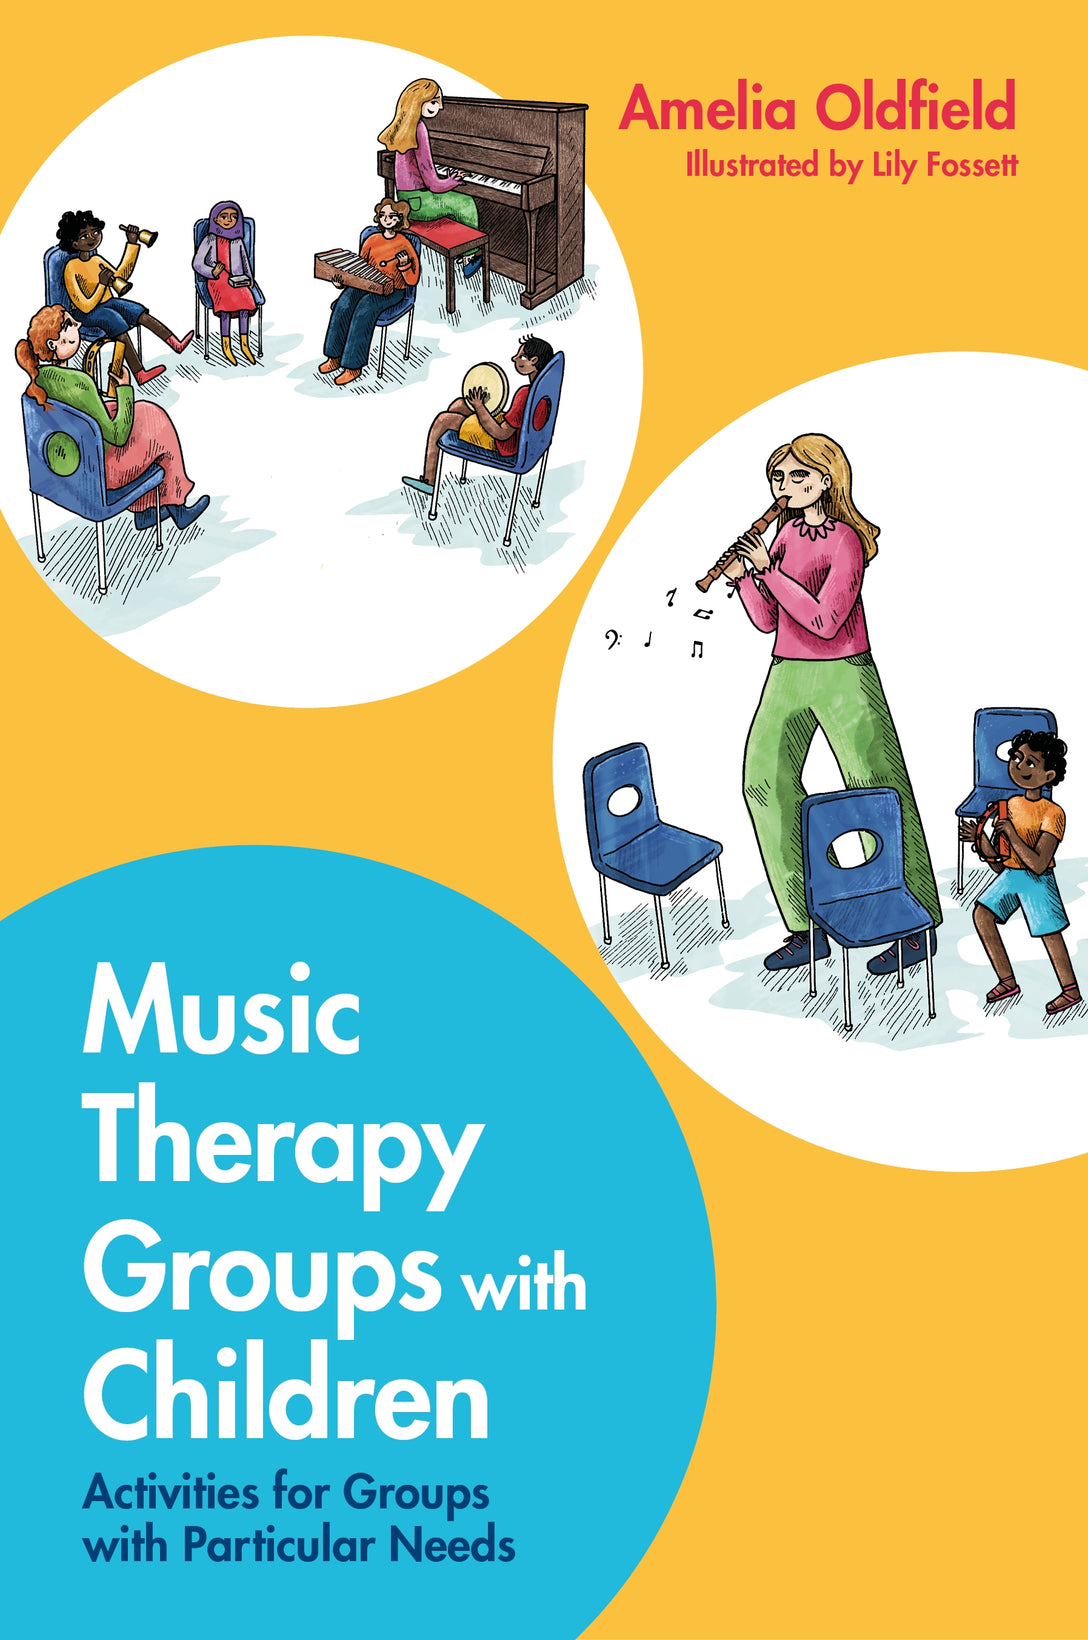 Music Therapy Groups with Children by Amelia Oldfield, Lily Fossett